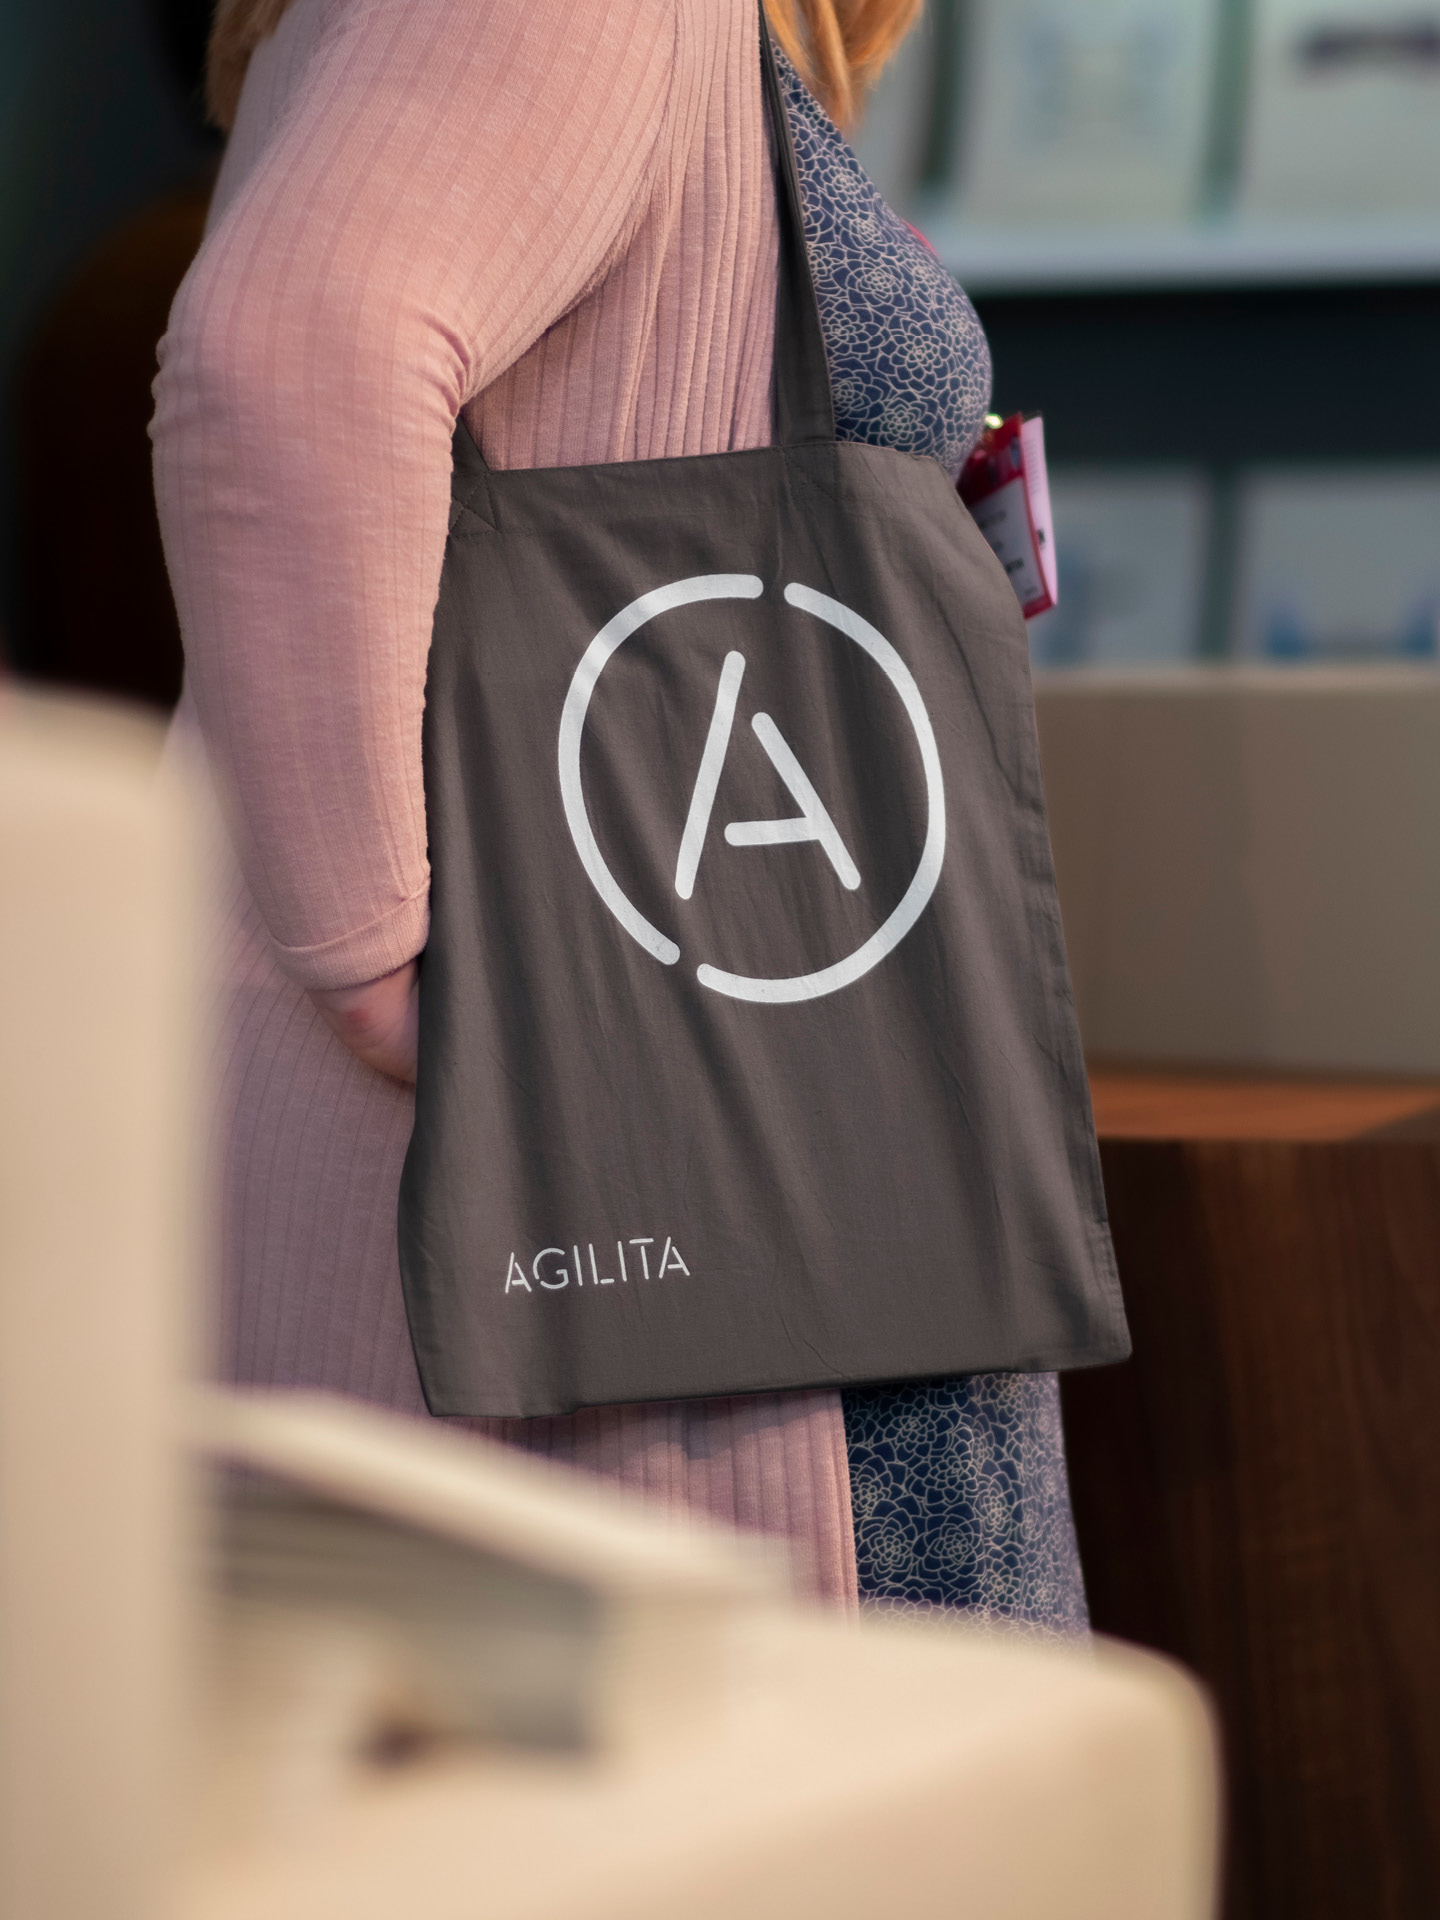 A photo of a woman carrying the Agilita branded tote bag at the exhibition